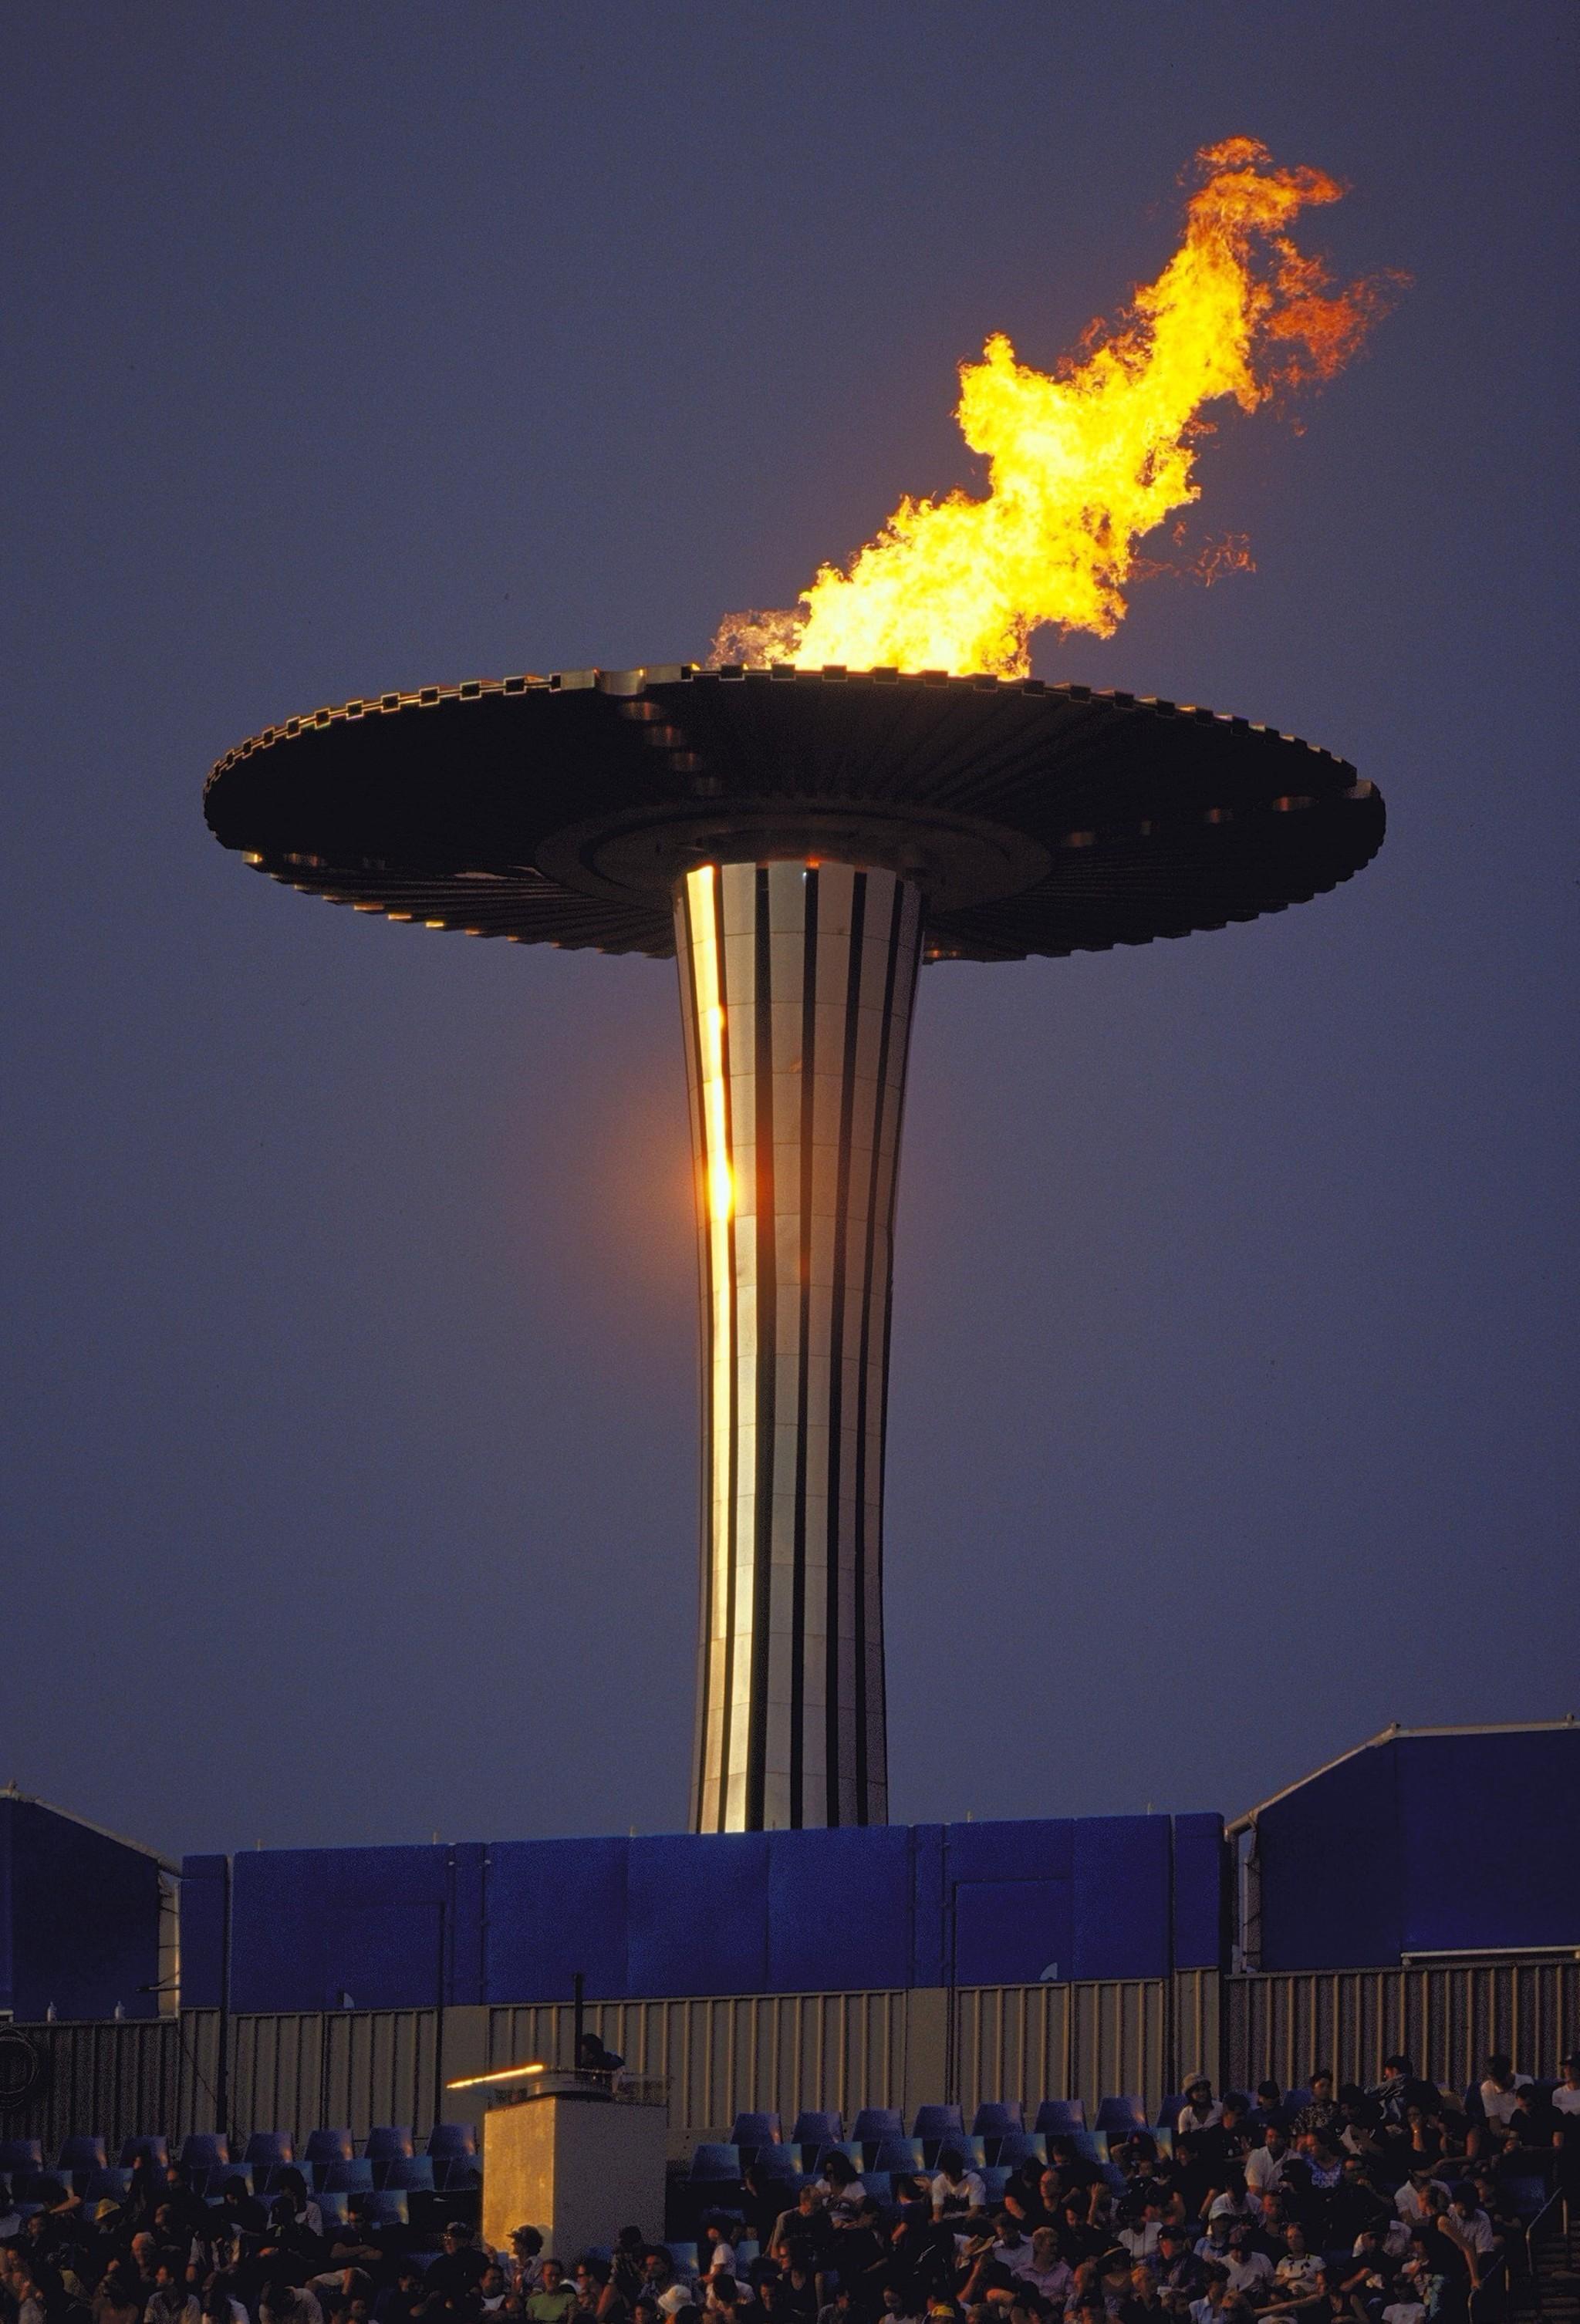 Olympic Flame Missed From London Skyline | KCUR